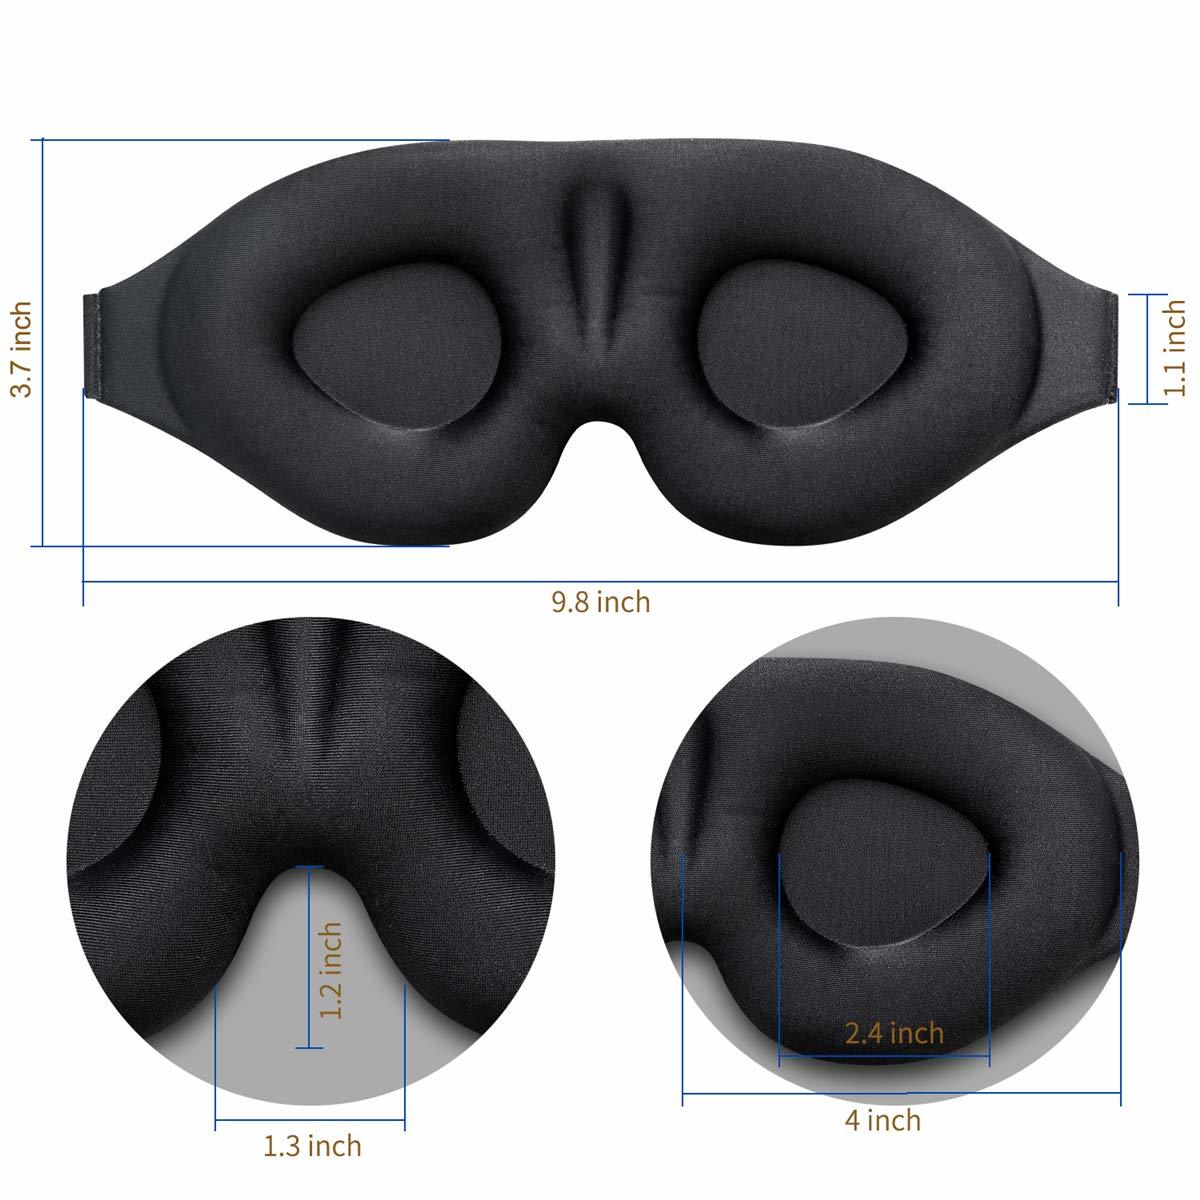 An eyemask - what to bring backpacking for a better night's sleep